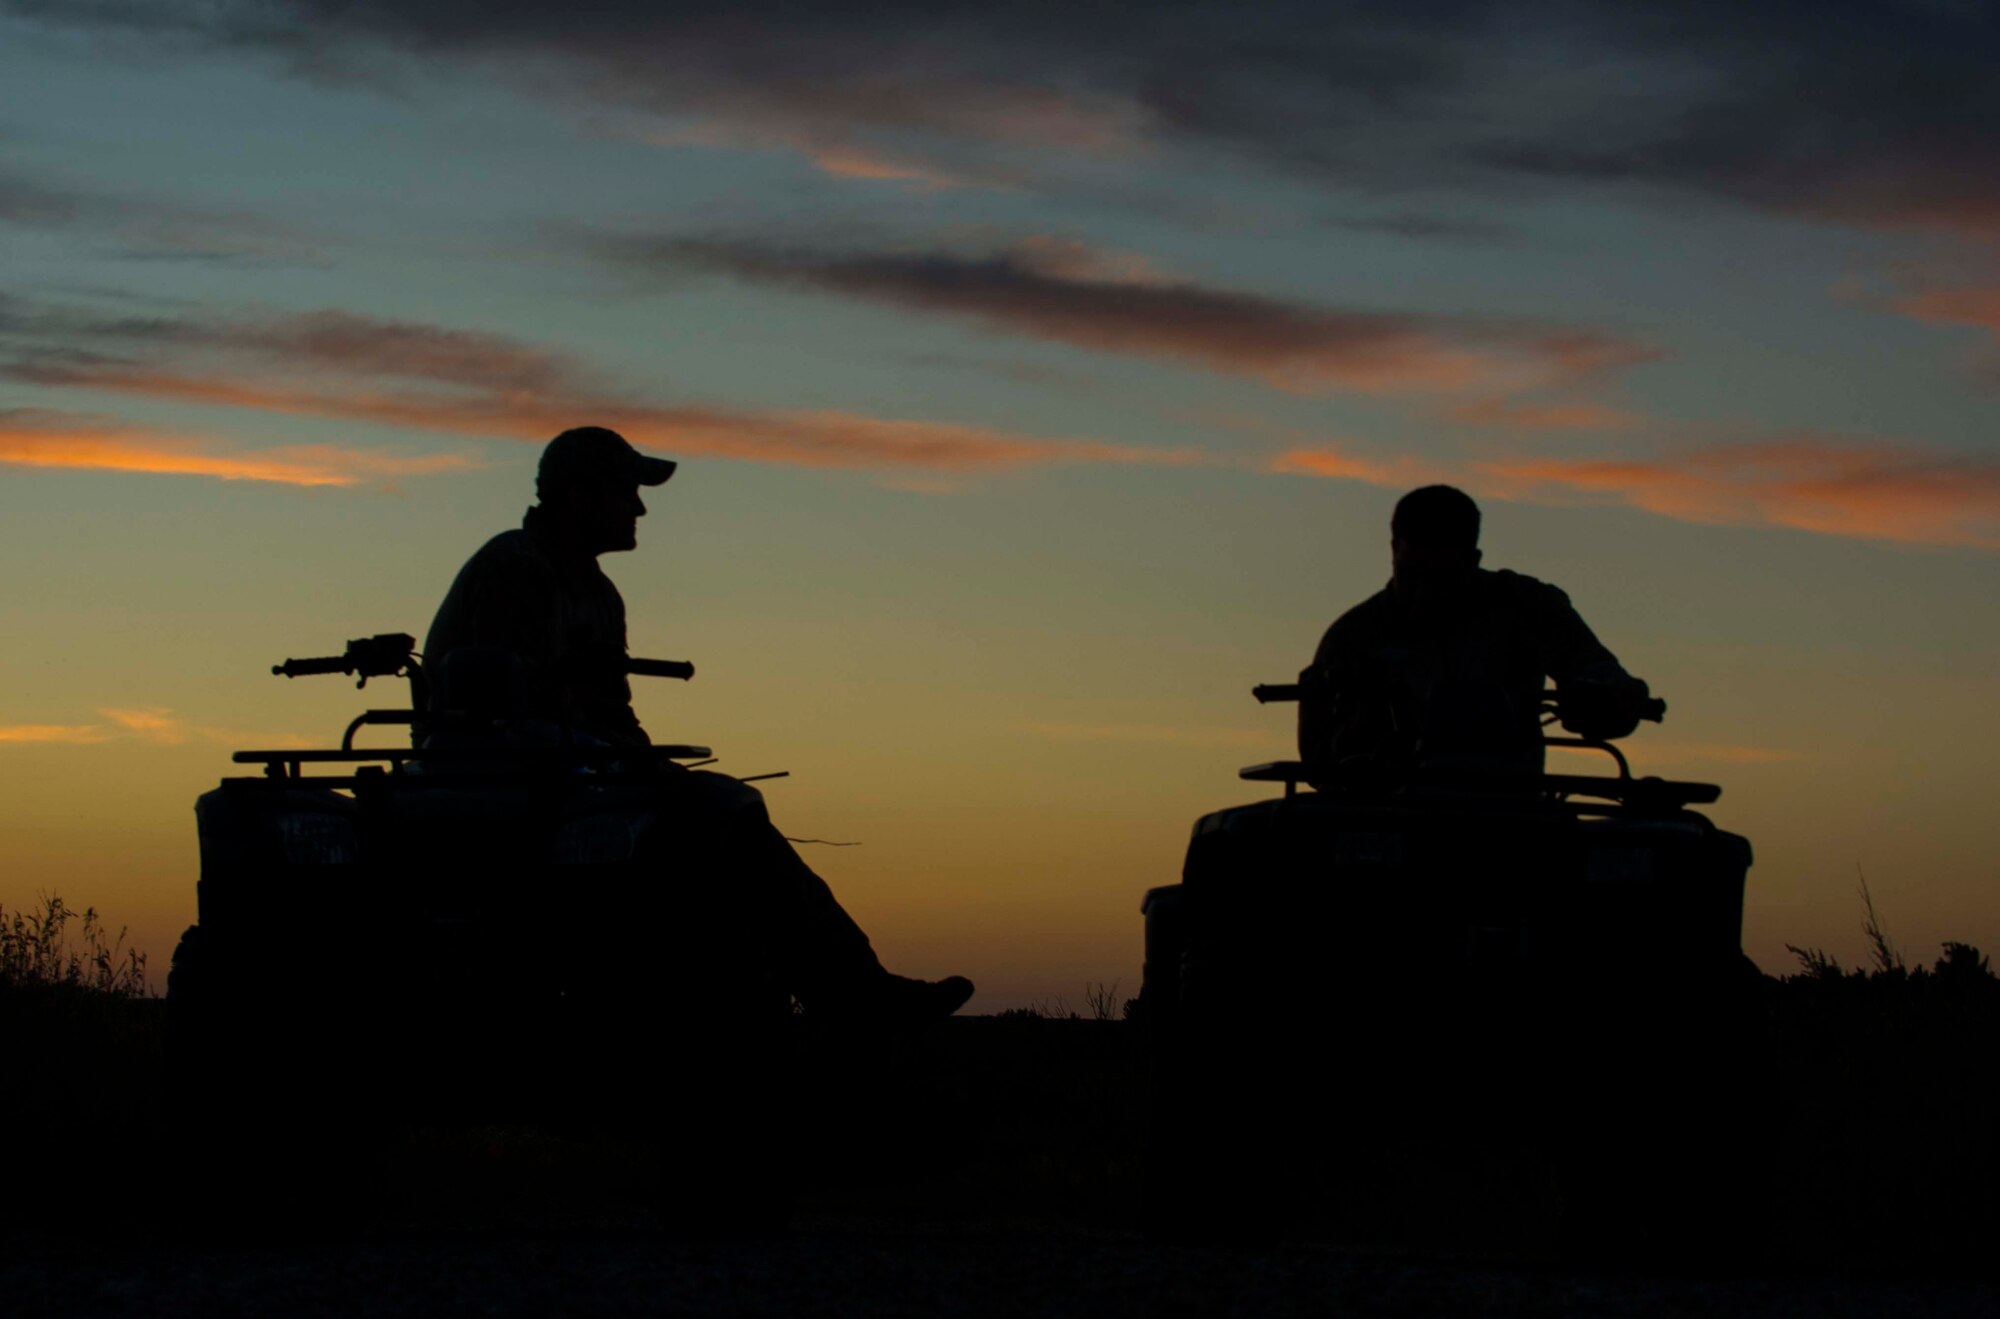 Tech. Sgt. Clifton Cleveland and Staff Sgt. Anthony Barrette, 5th Operations Support Squadron survival, evasion, resistance and escape specialists, sit on ATVs during SERE training in Garrison, N.D., Aug. 11, 2016. During a rescue scenario, Cleveland and Barrette acted as friendly forces to Airmen who were scattered around the training site. (U.S. Air Force photo/Senior Airman Apryl Hall)